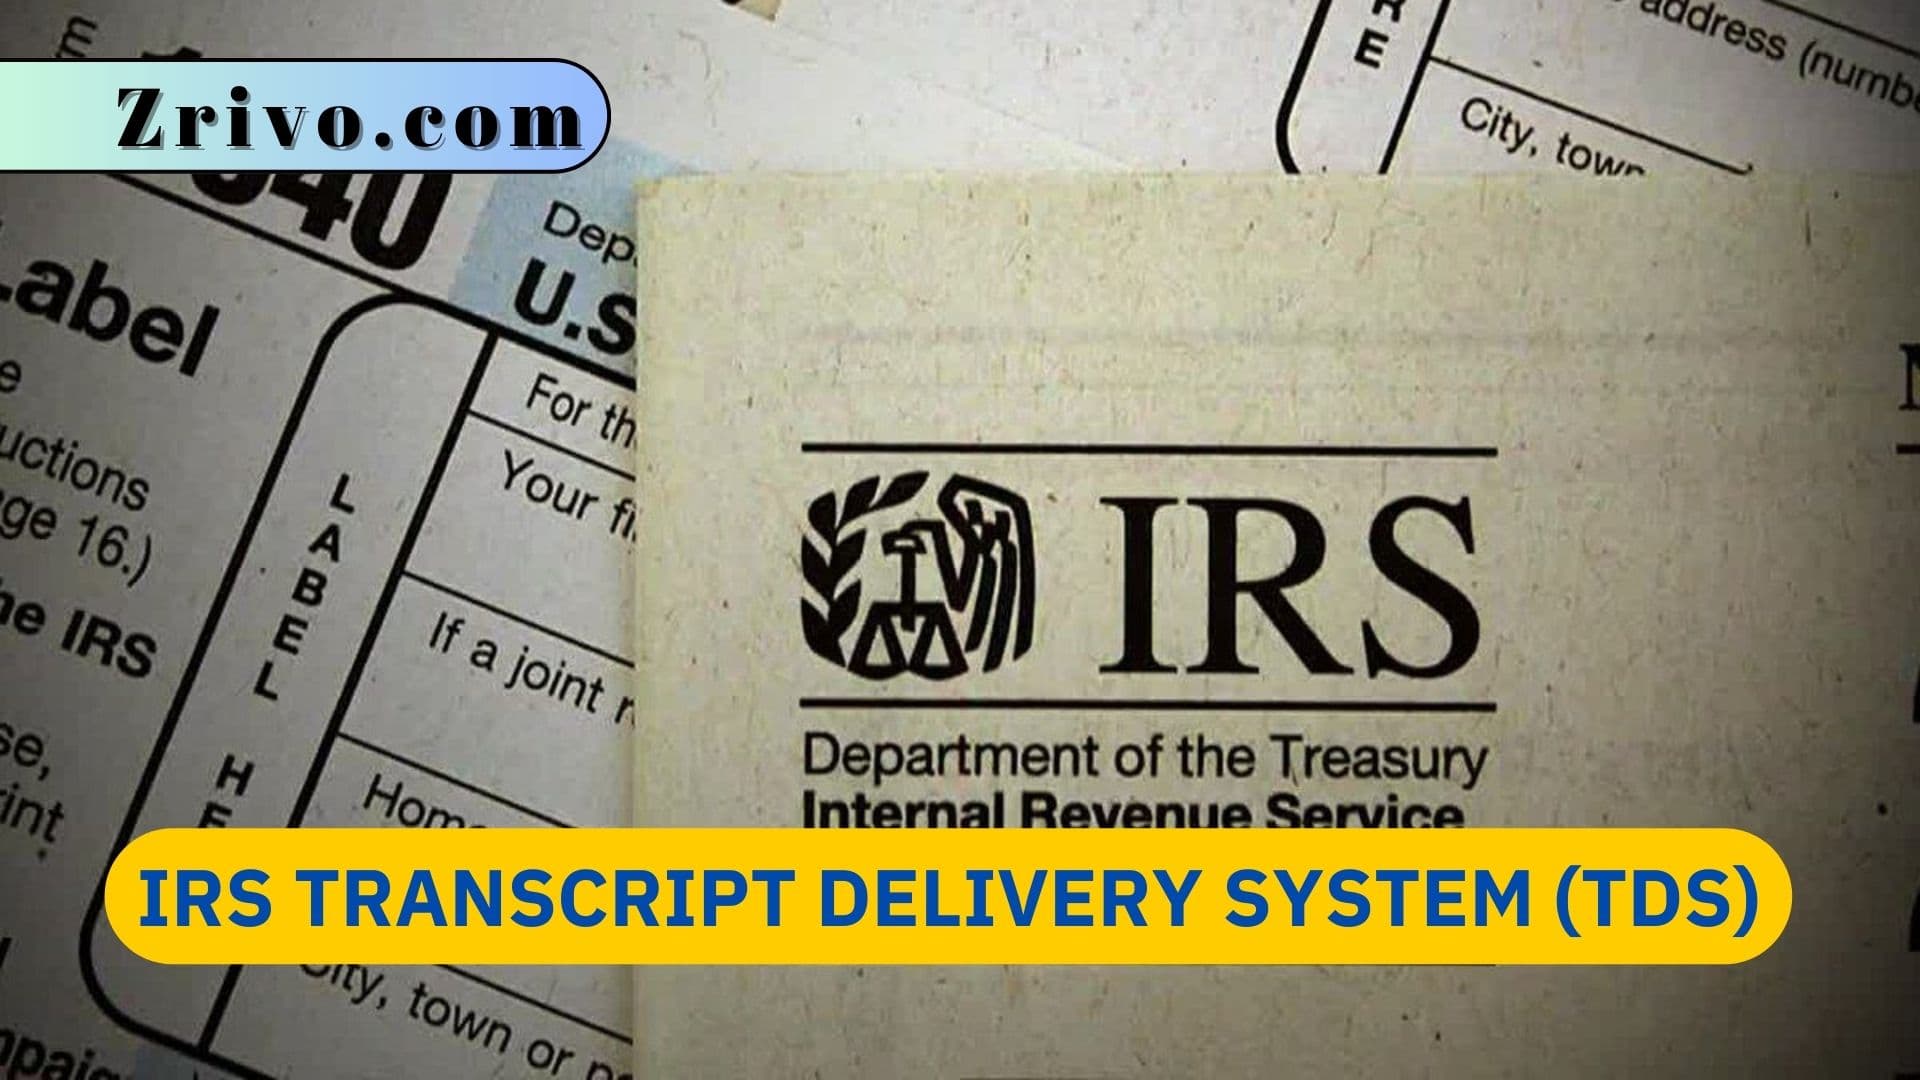 IRS Transcript Delivery System (TDS)